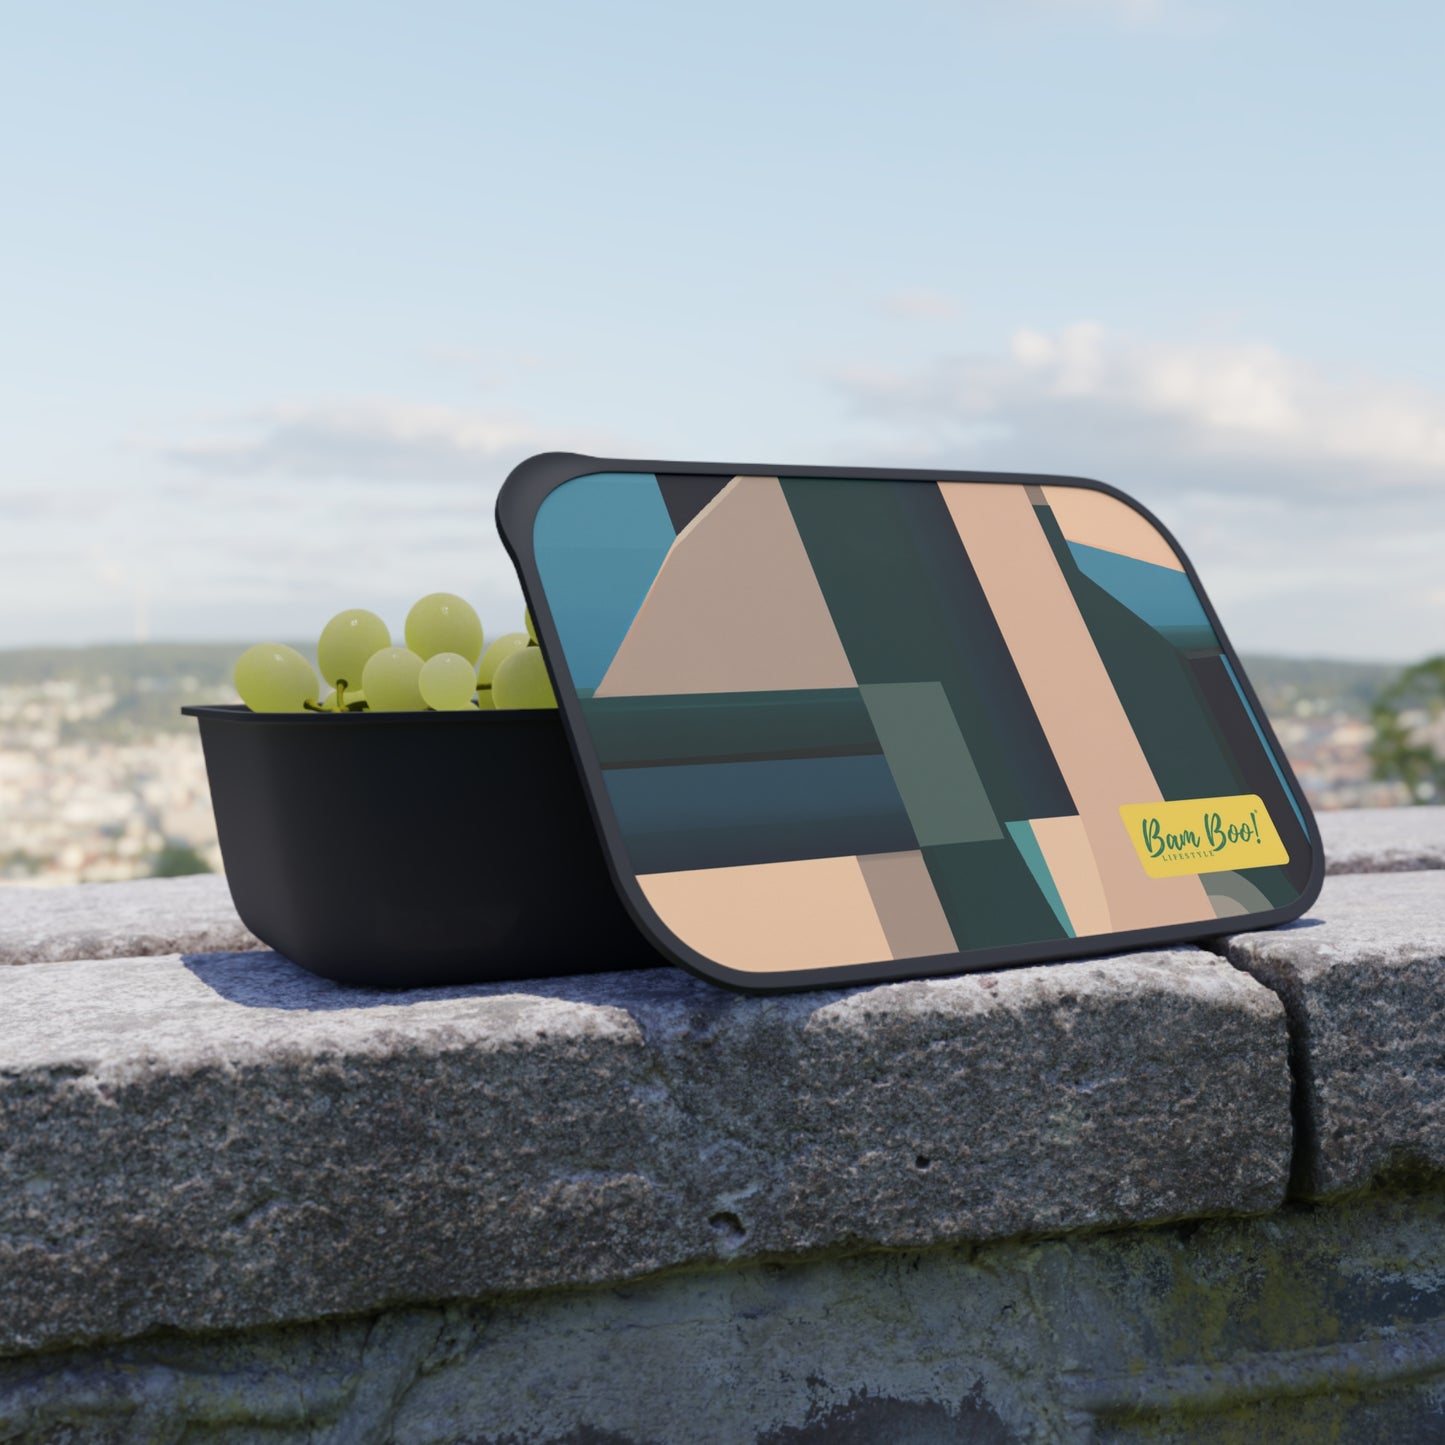 Synthesis of the Digital & Analog: An Exploration of Texture, Shape, Color, and Pattern. - Bam Boo! Lifestyle Eco-friendly PLA Bento Box with Band and Utensils